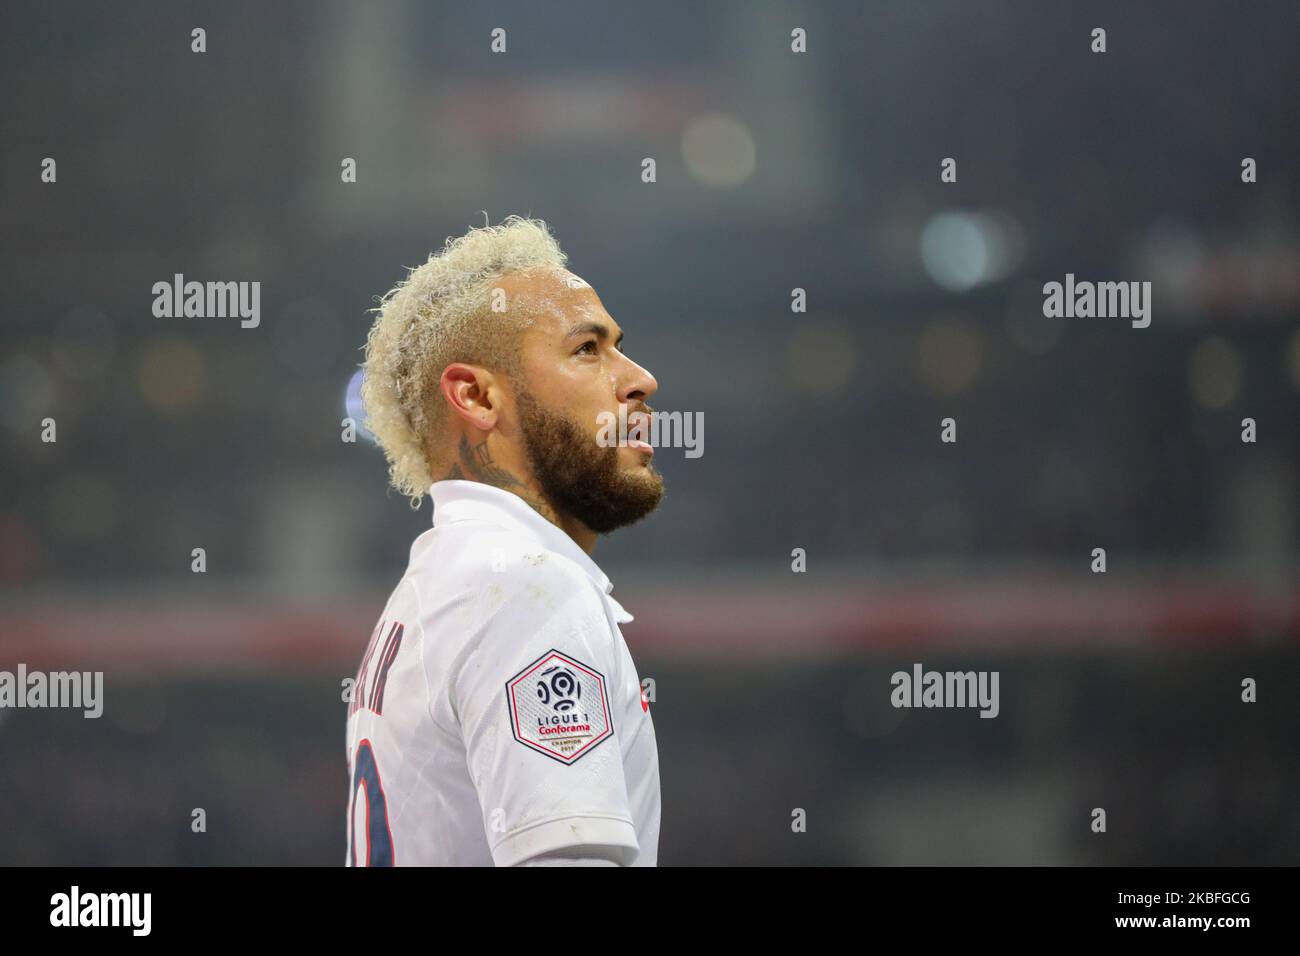 Junior NEYMAR during the French L1 football match between Lille (LOSC) and Paris Saint-Germain (PSG) at the Pierre-Mauroy Stadium in Villeneuve d'Ascq, near Lille, northern France, on January 26, 2020. (Photo by Thierry Thorel/NurPhoto) Stock Photo